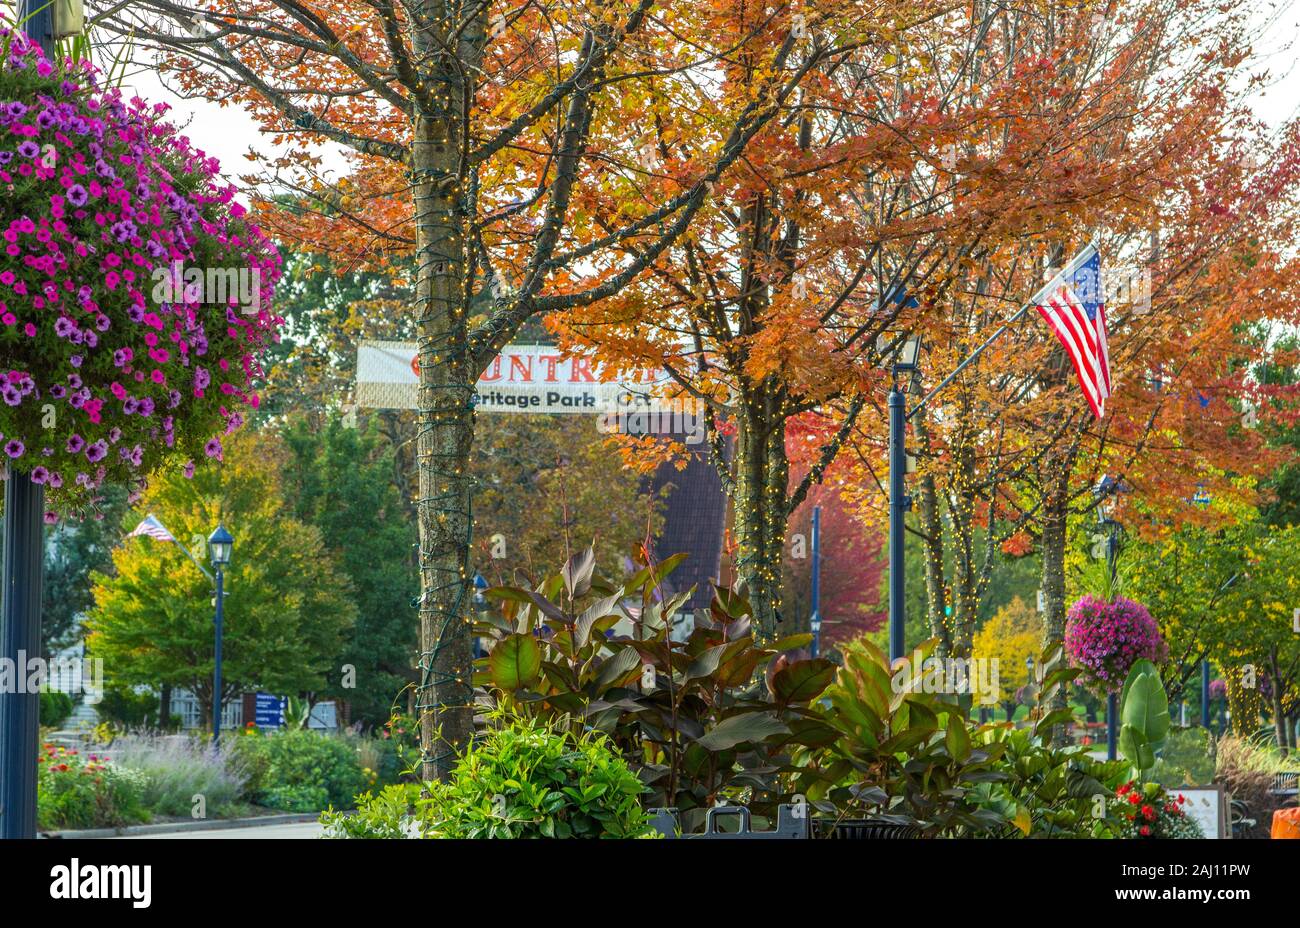 Small Town USA. Main street USA with fall color foliage and American flag in downtown Frankenmuth, Michigan. Stock Photo